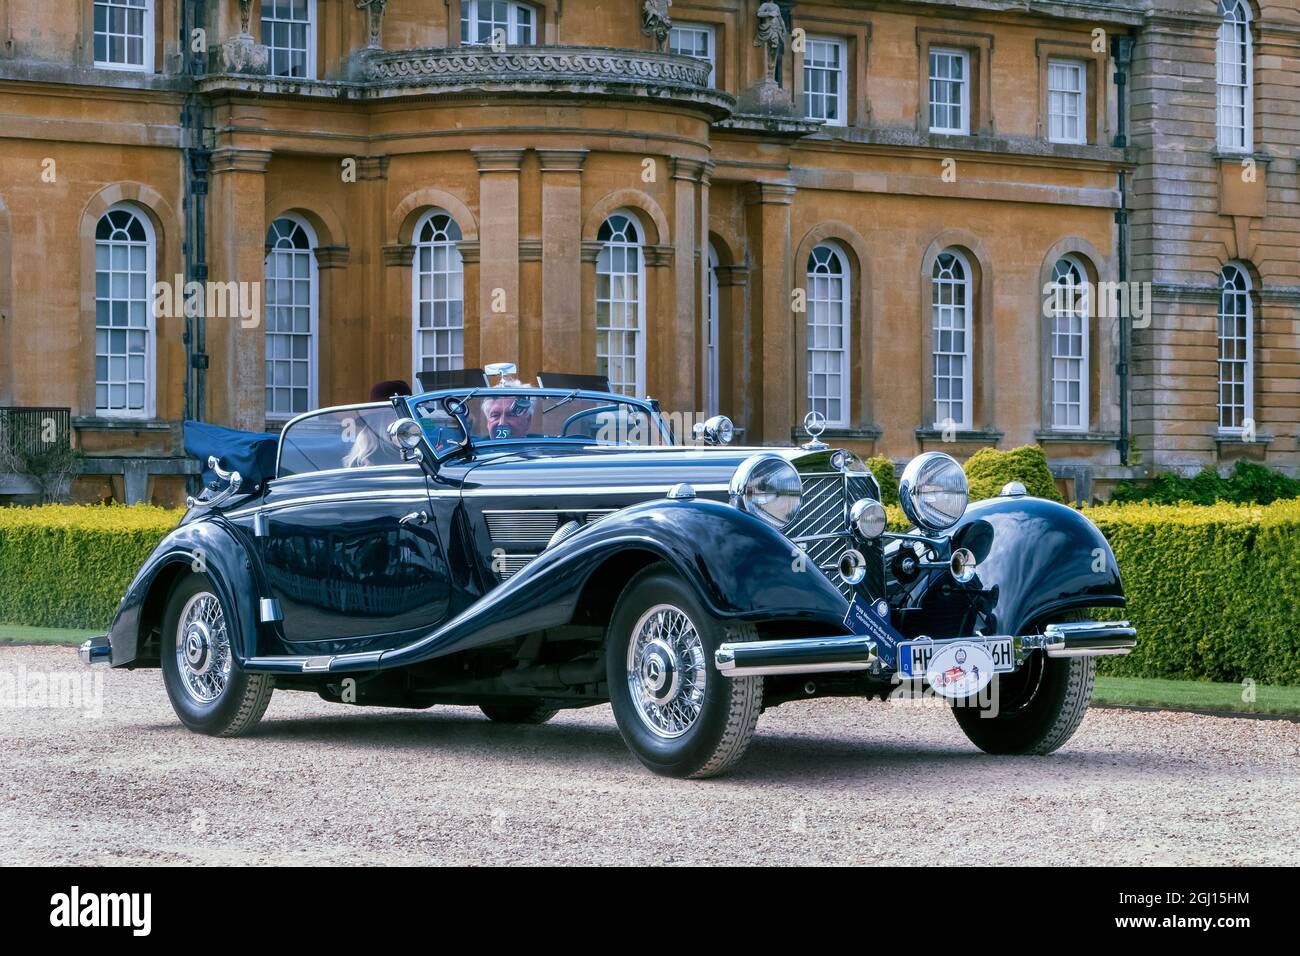 1938 Mercedes-Benz 540K Cabriolet winner of 'Best In Show' at the 2021 Salon Prive Concours D'Elegance at Blenheim Palace Woodstock Oxfordshire UK Stock Photo